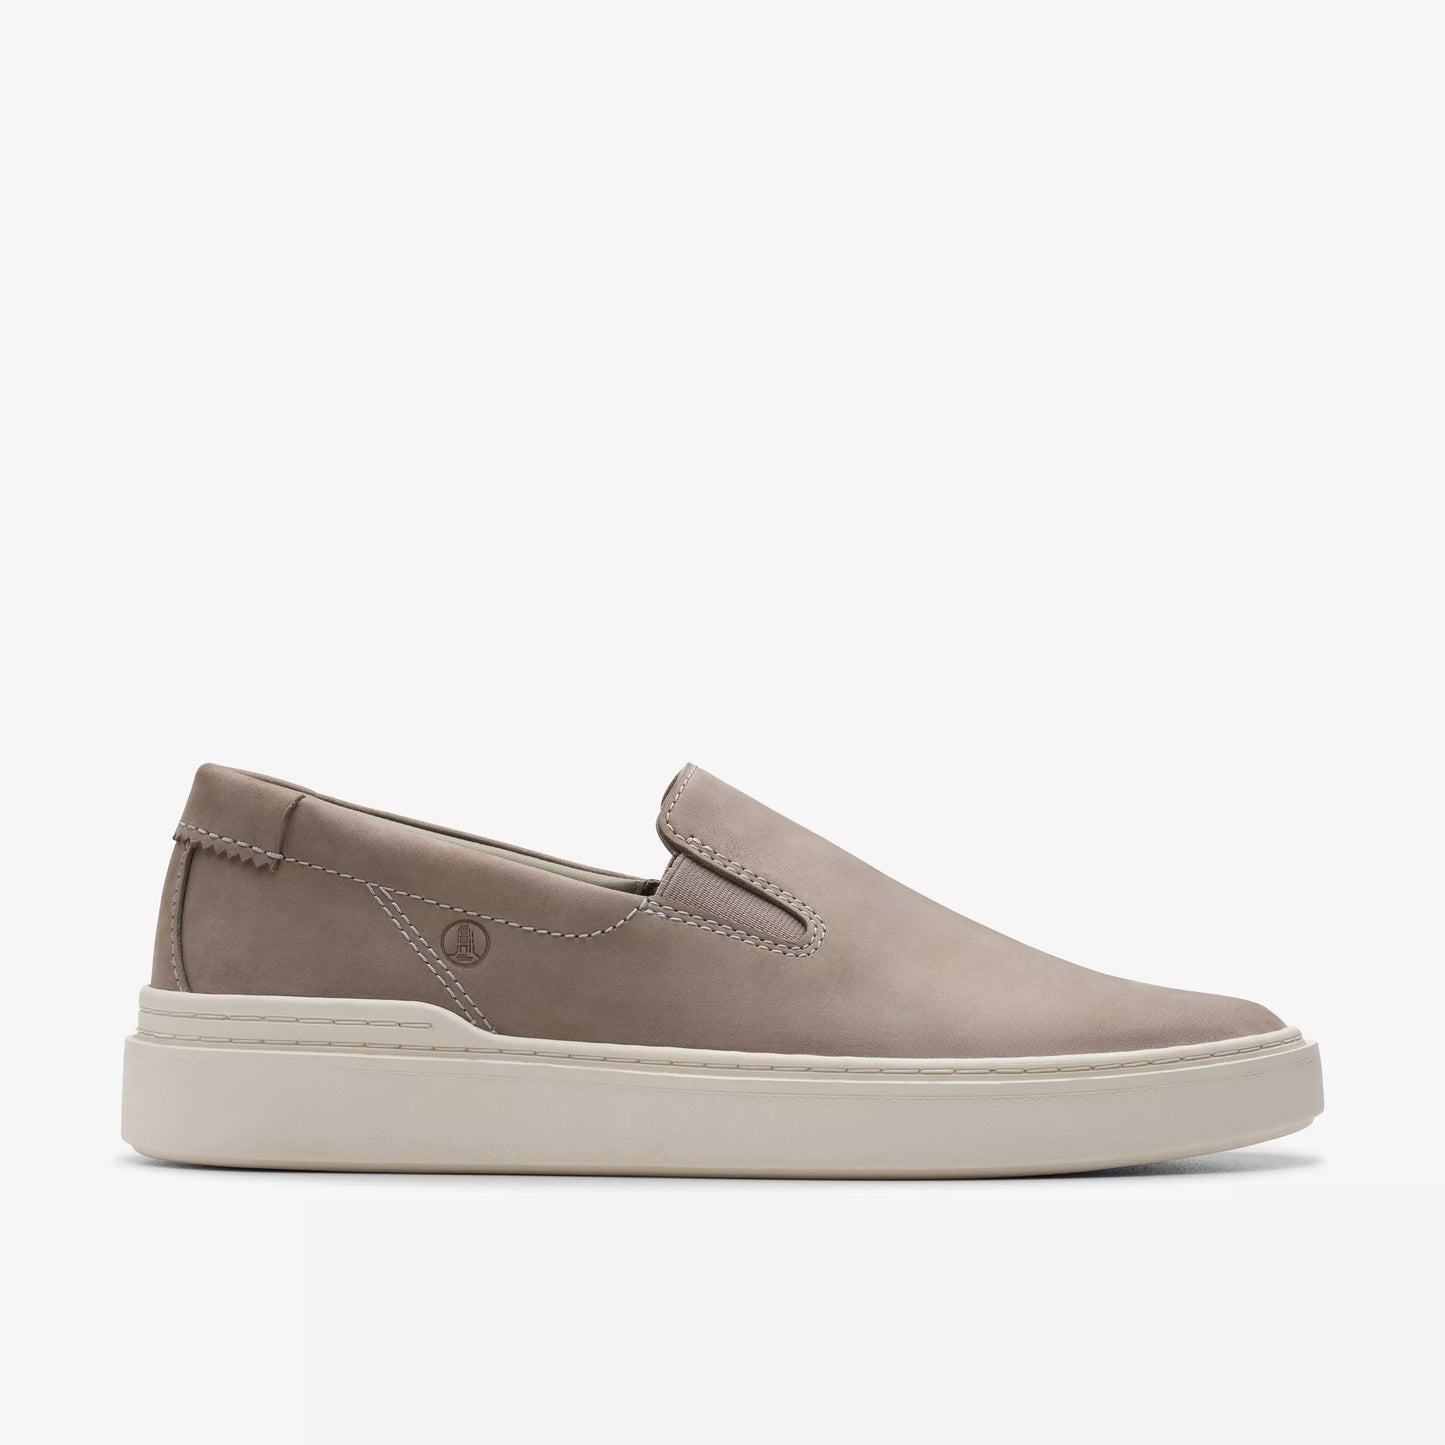 Side view of the Clarks Craft Swift Go Slip-On Shoe in the color Grey Nubuck